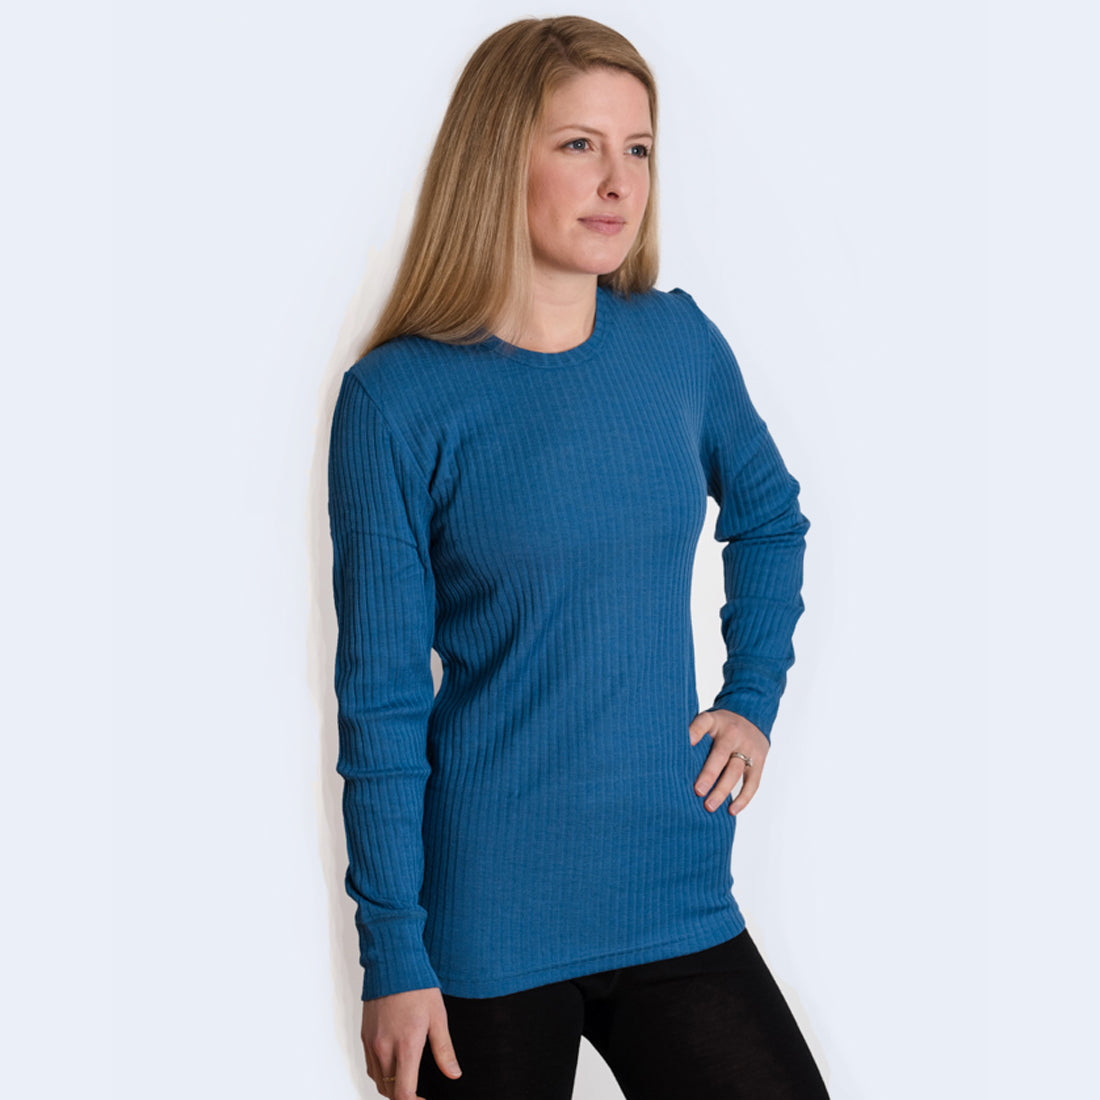 Ladies long sleeve shirts from Merino wool with silk